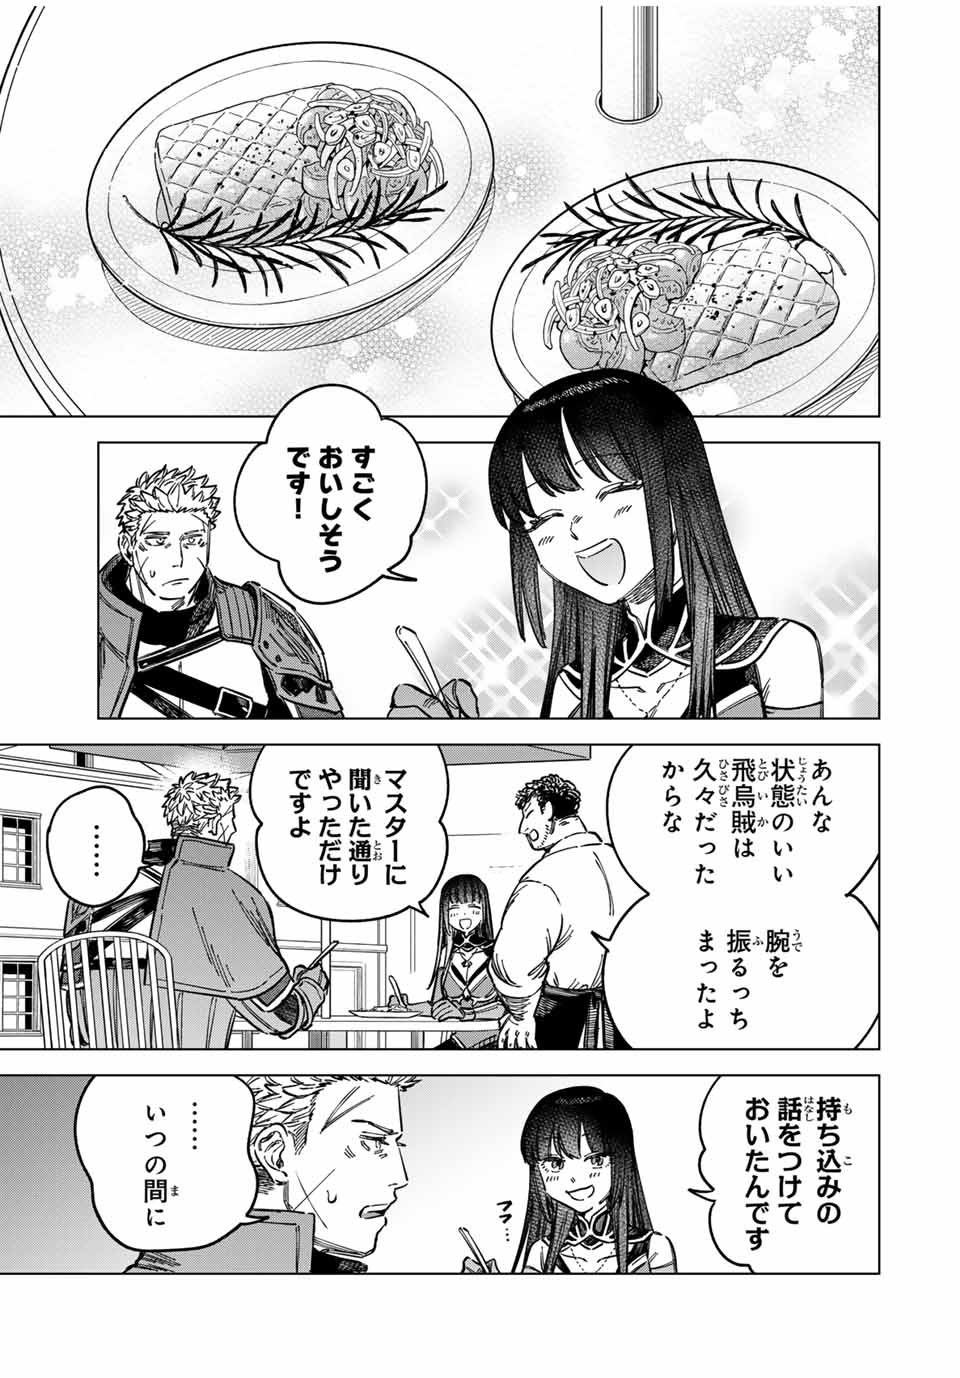 Witch and Mercenary 魔女と傭兵 第10話 - Page 11